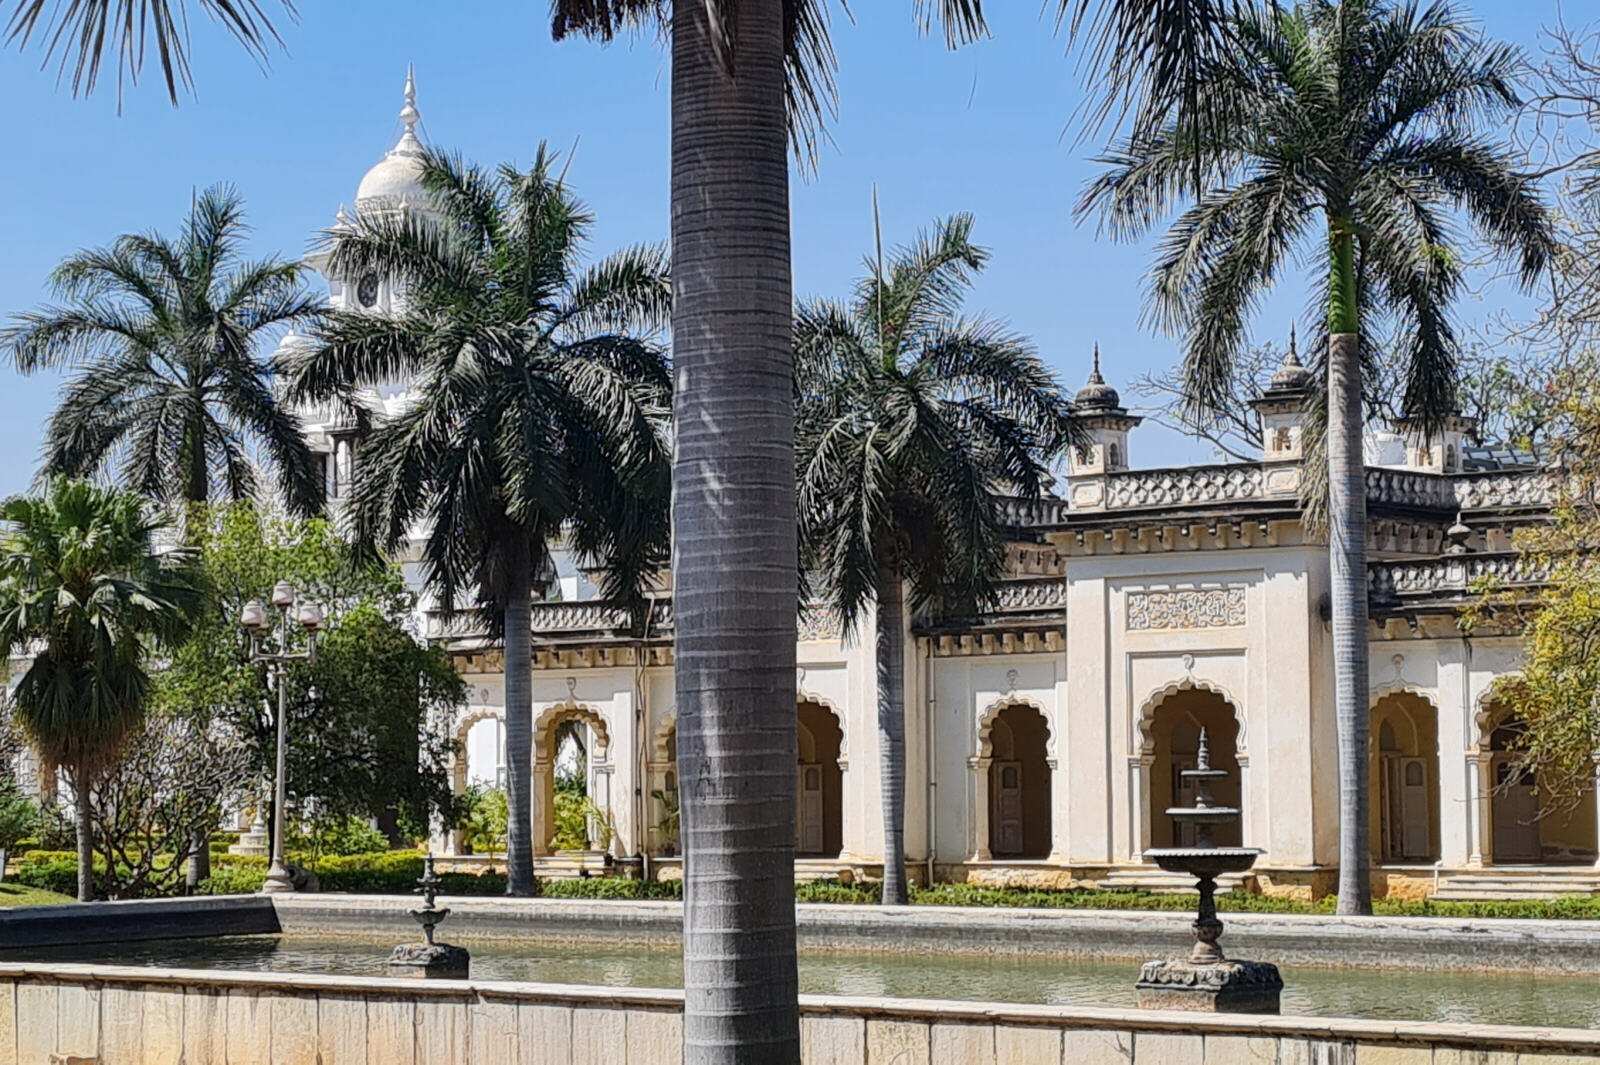 The Chowmahalla palace in Hyderabad, India